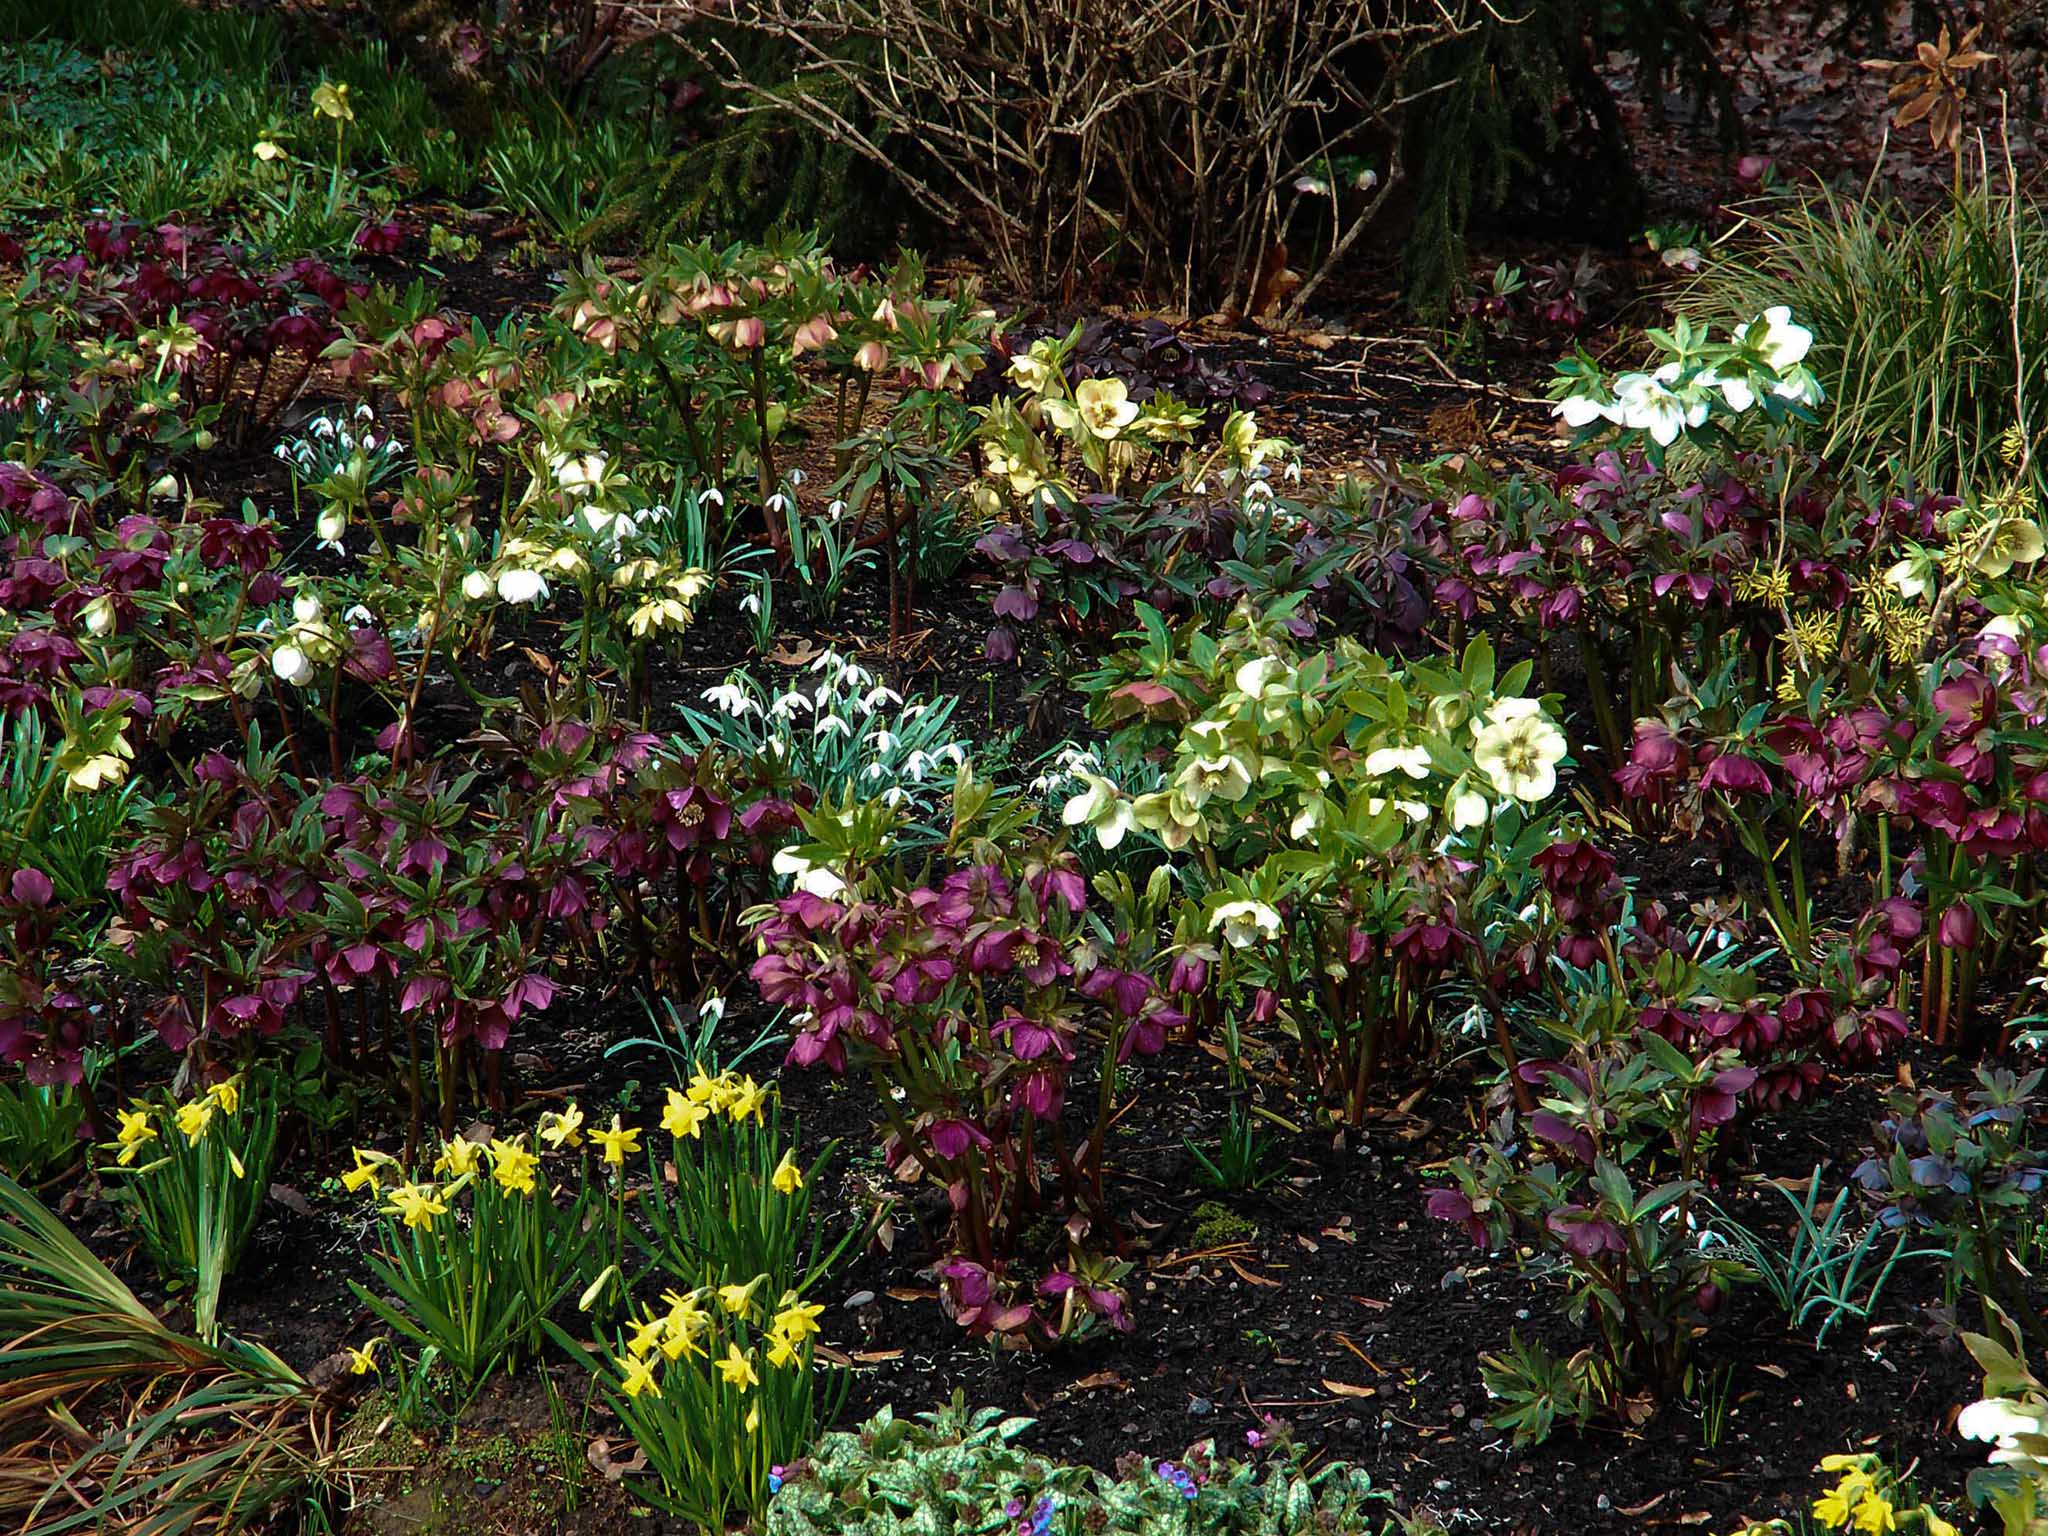 Purple-black varieties of Lenton rose are effective paired with the fresh yellow colours of emerging bulbs and perennials in late winter and early spring